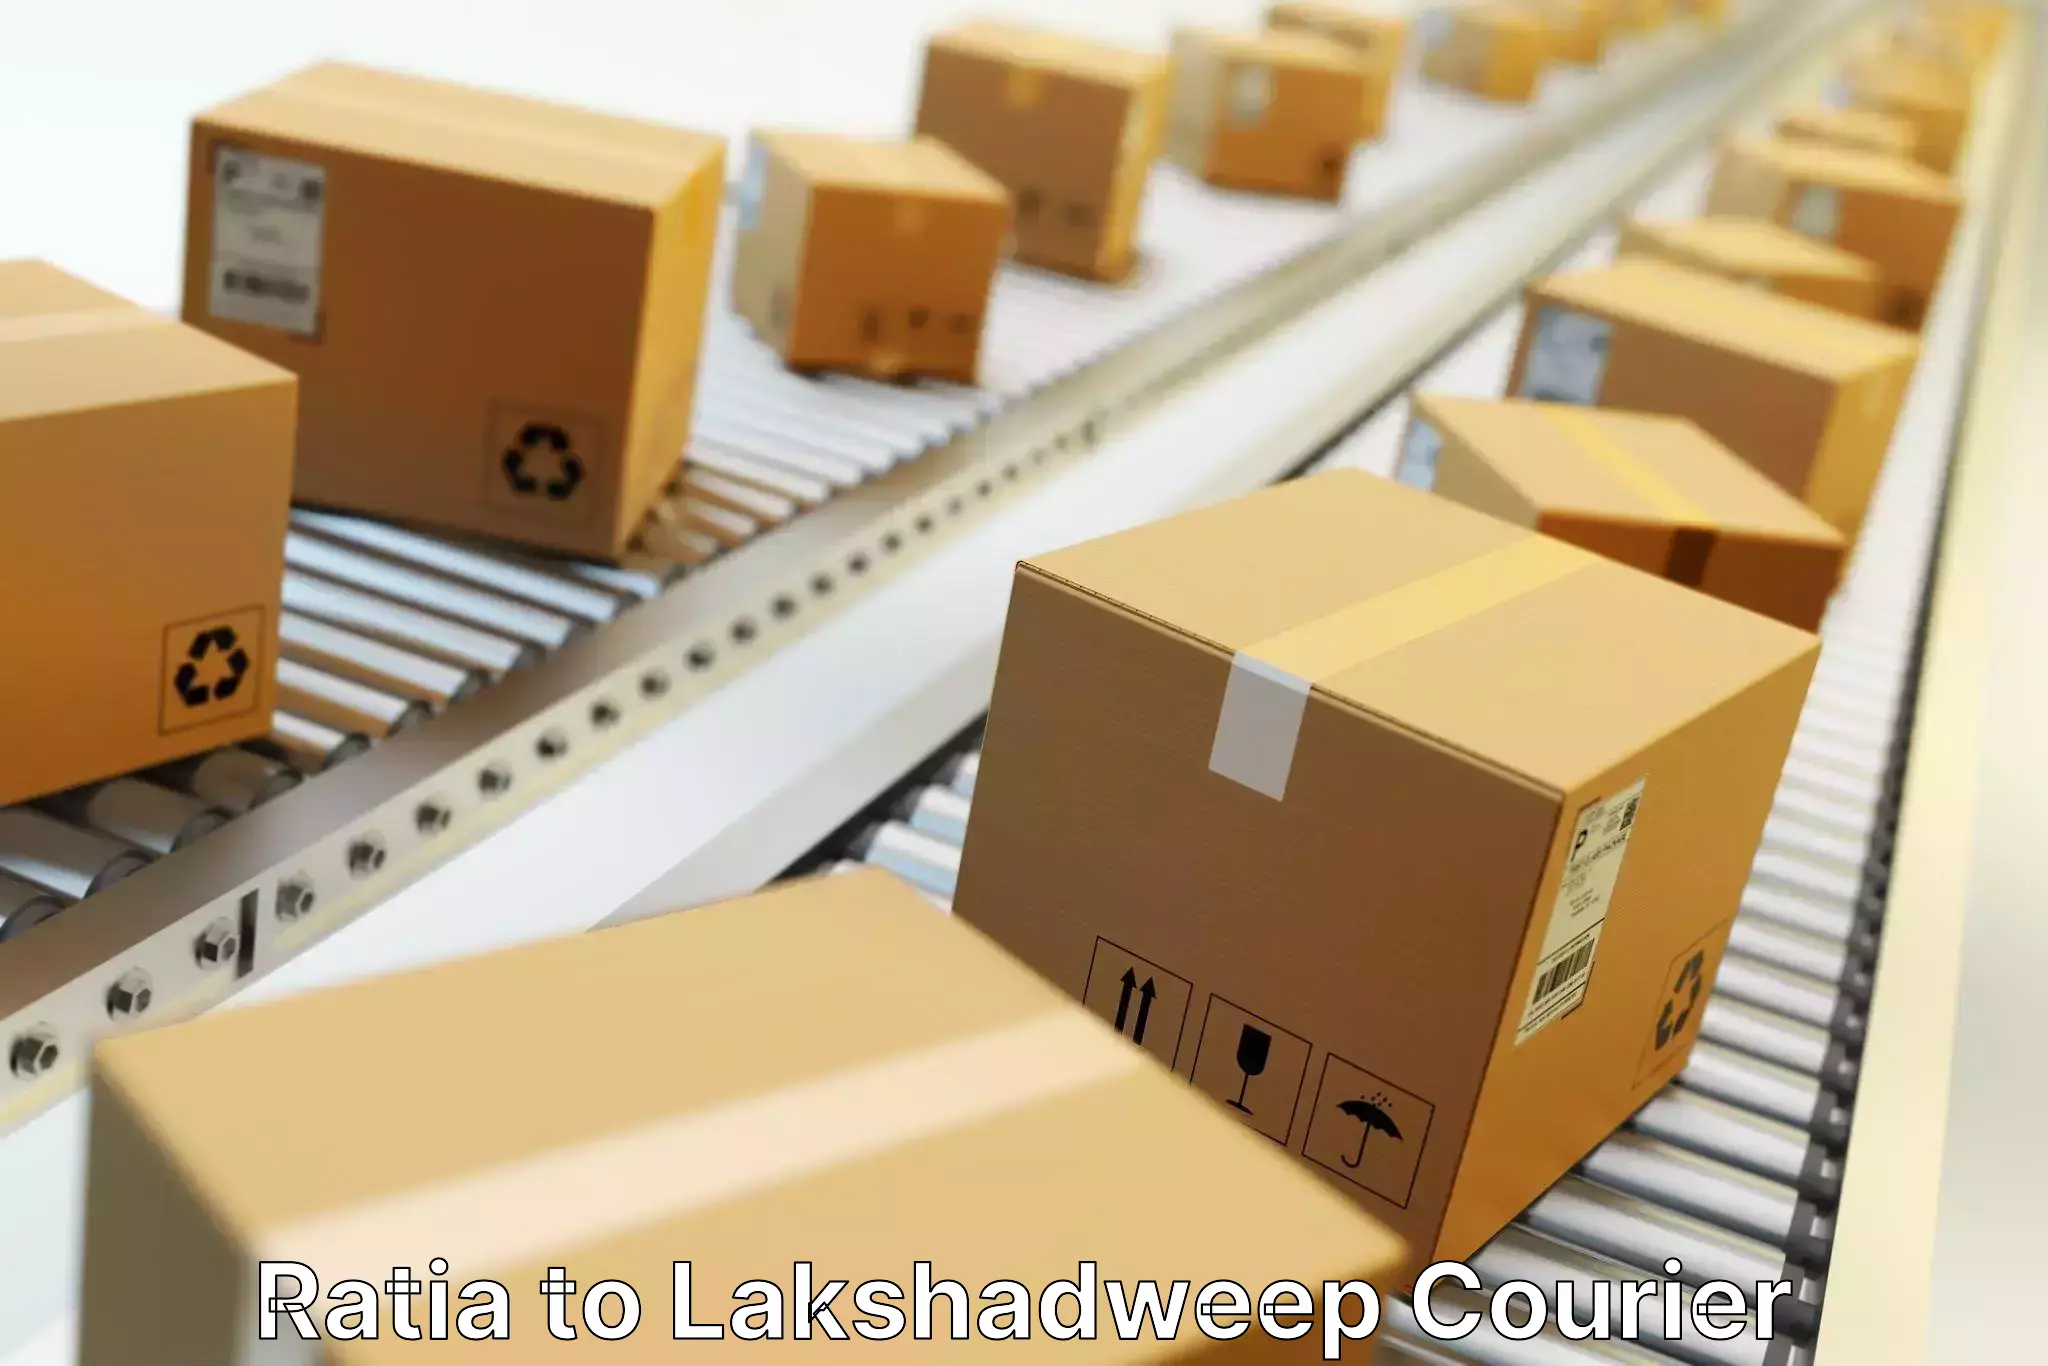 Full-service courier options Ratia to Lakshadweep